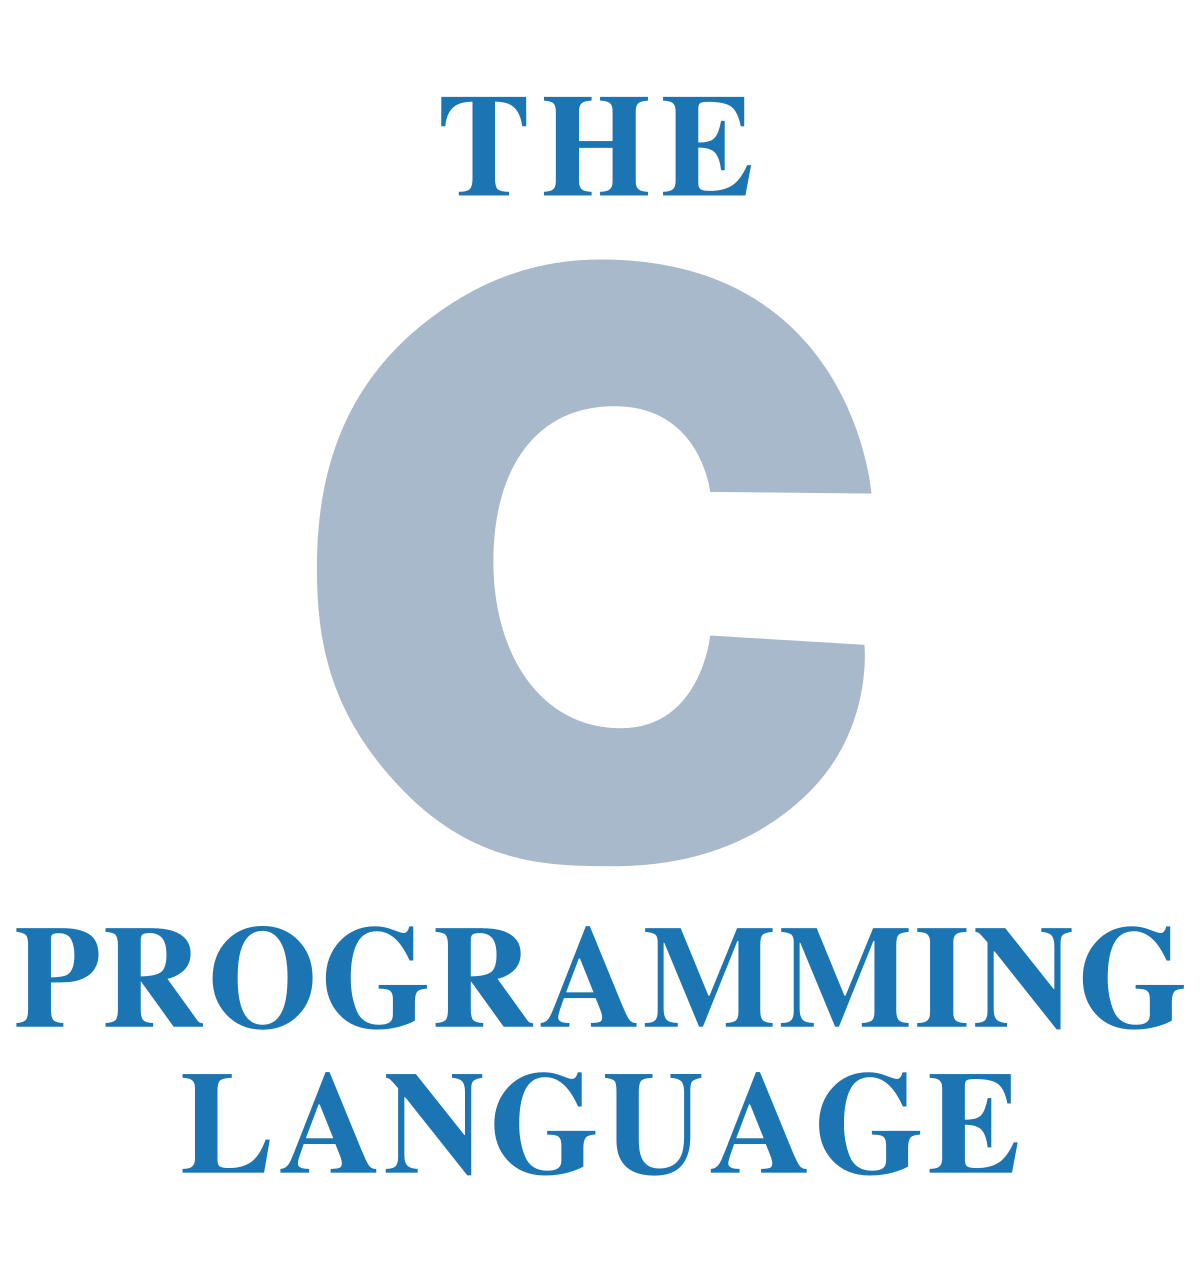 With Just Letter C Logo - C (programming language)